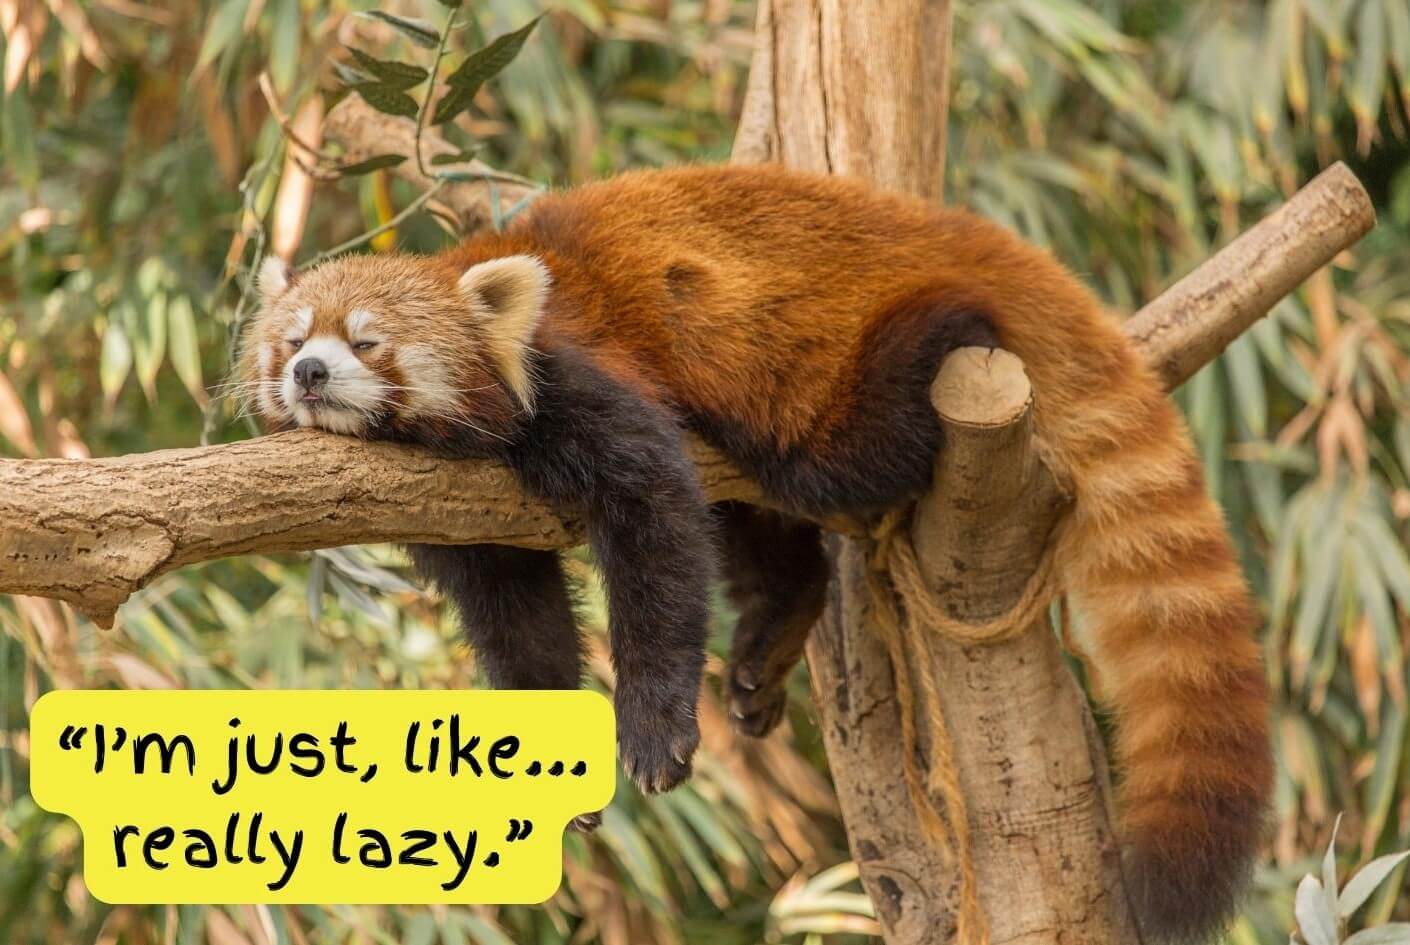 A lazy red panda sleeping in a tree because he's been given too much homework.